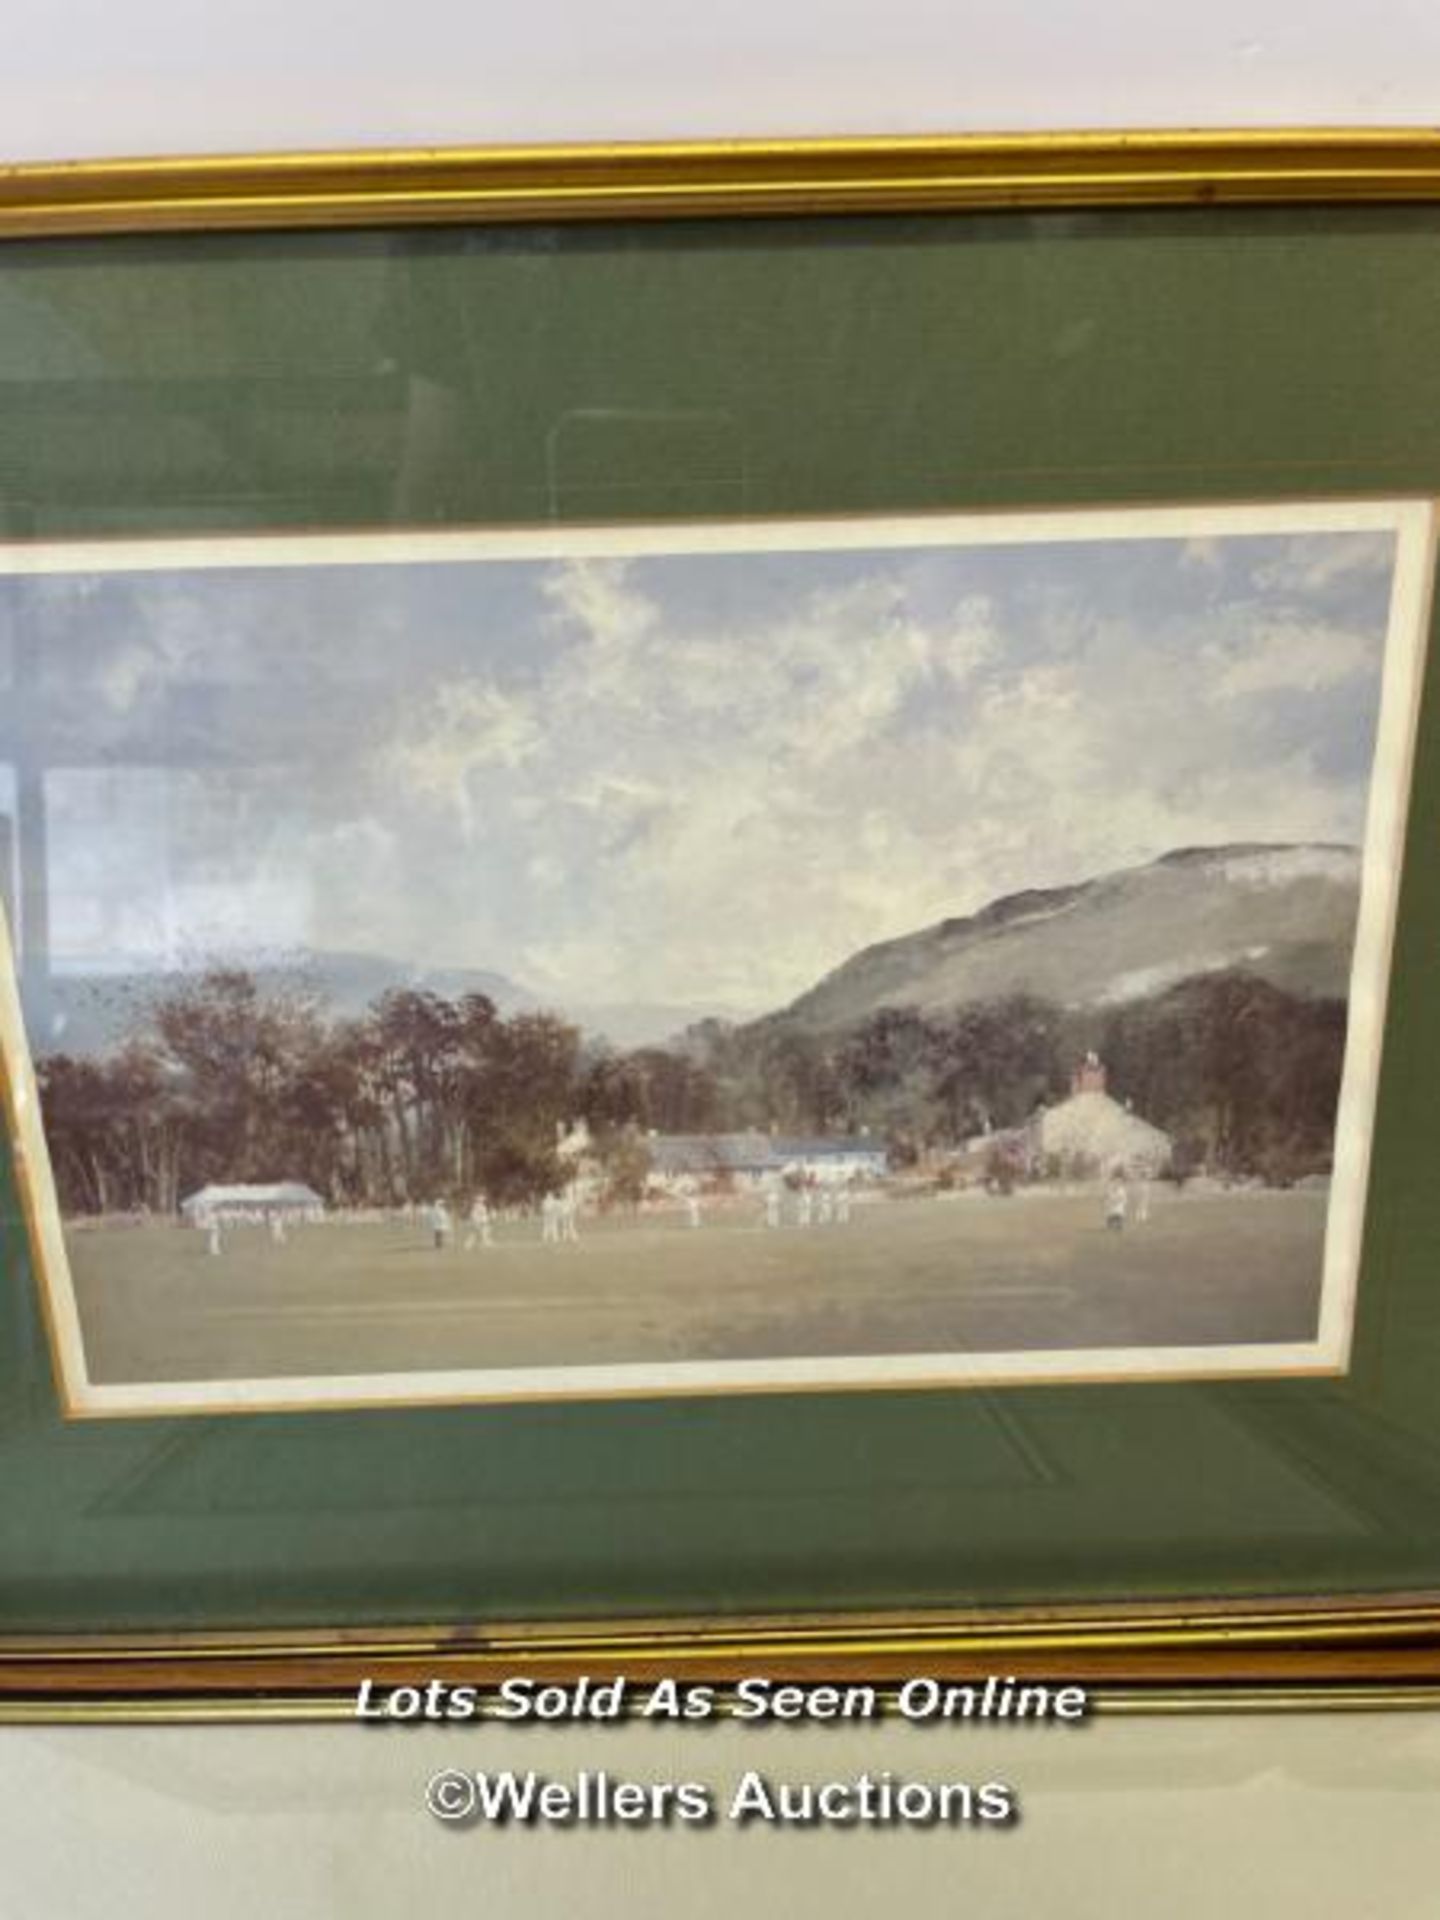 SIX FRAMED AND GLAZED PRINTS OF VARIOUS CRICKET SCENES - Image 6 of 6